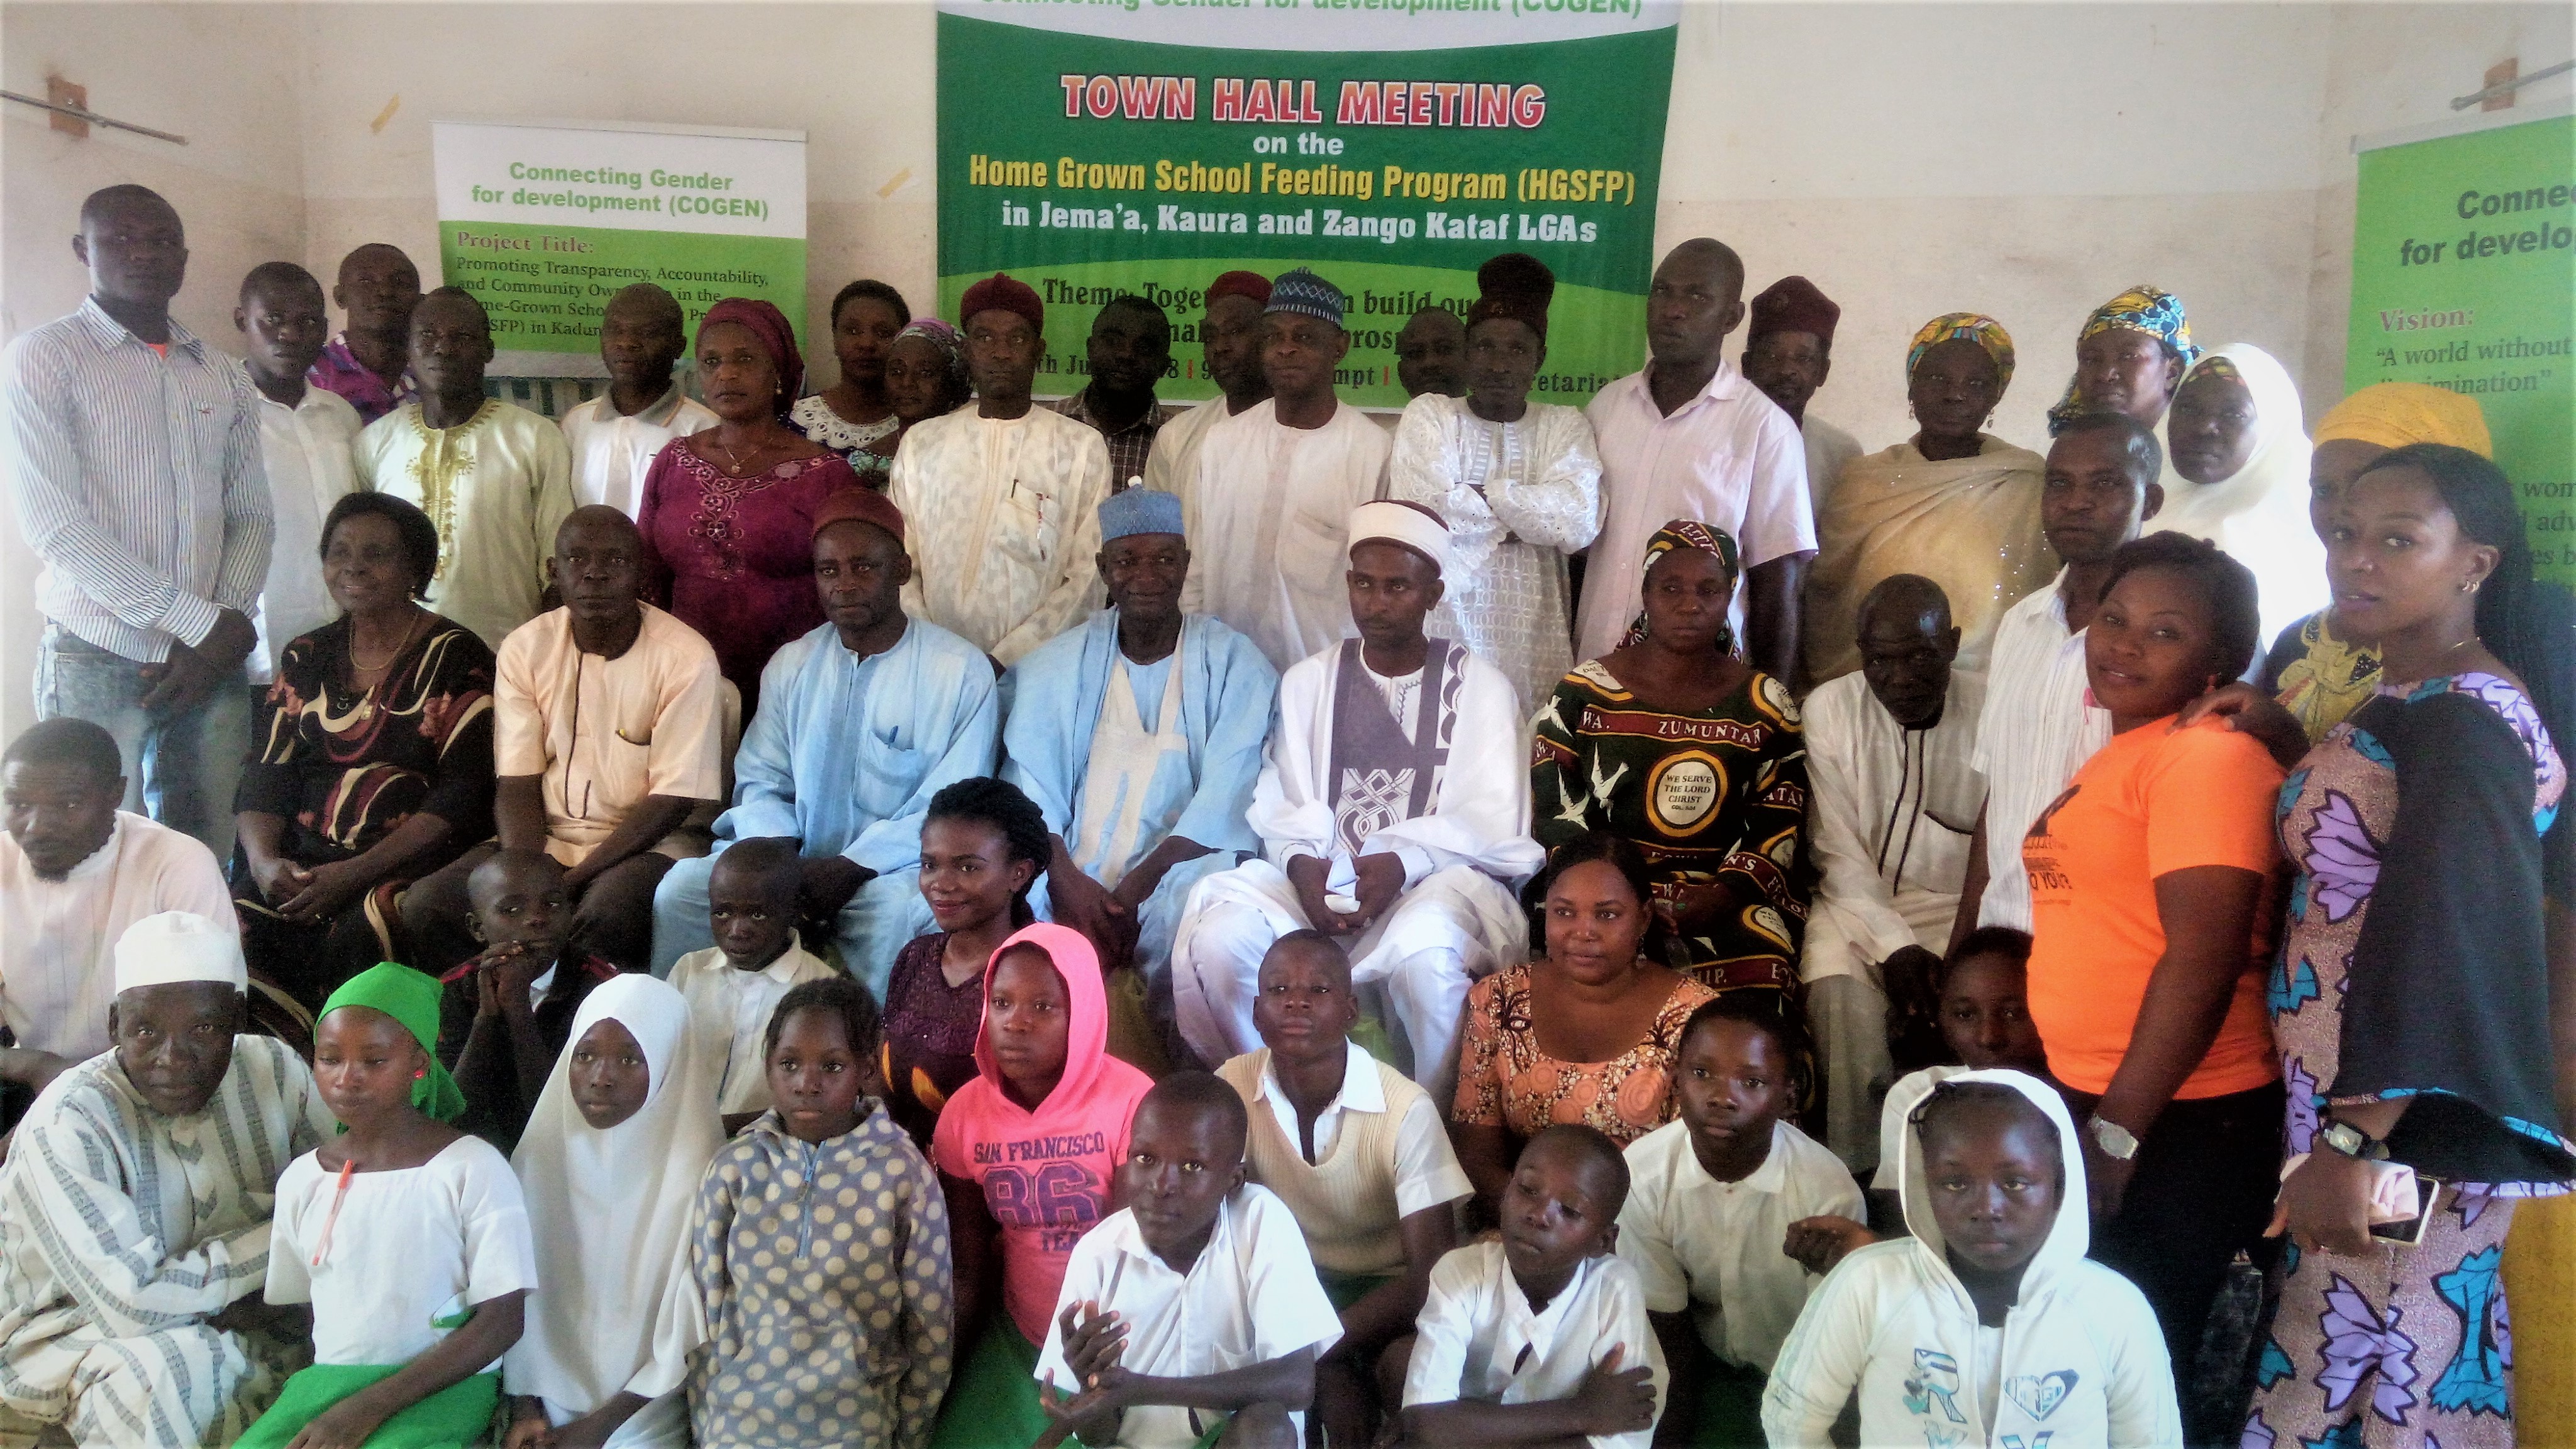 Participants-at-a-Town-Hall-Meeting-on-Federal-Government-Home-Grown-School-Feeding-Programme-Organised-by-an-NGO-Connecting-Gender-for-Development-Held-at-Kafanchan-Jemaa-LGA-